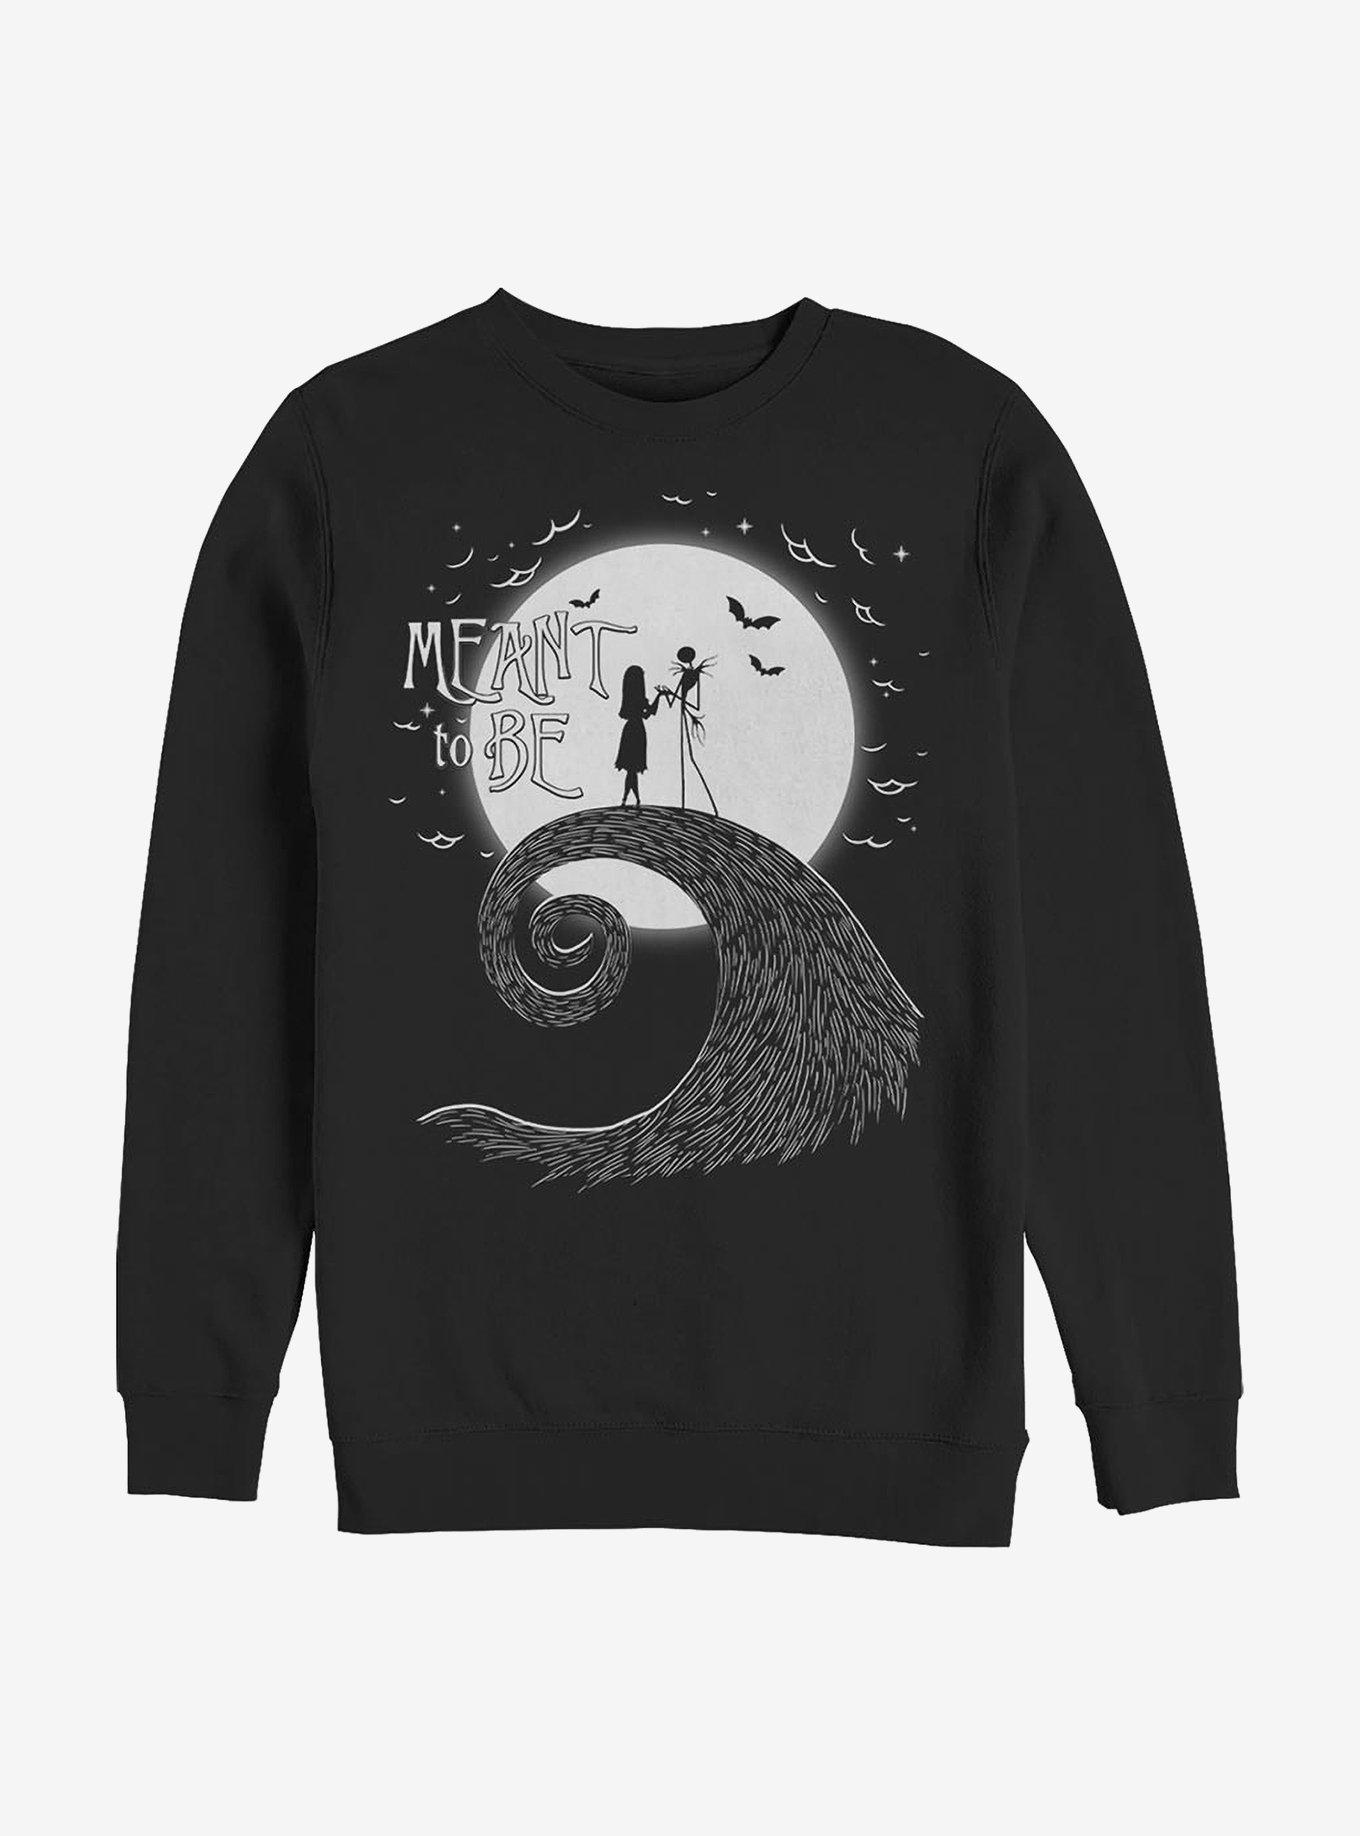 The Nightmare Before Christmas Jack & Sally Meant To Be Sweatshirt, BLACK, hi-res